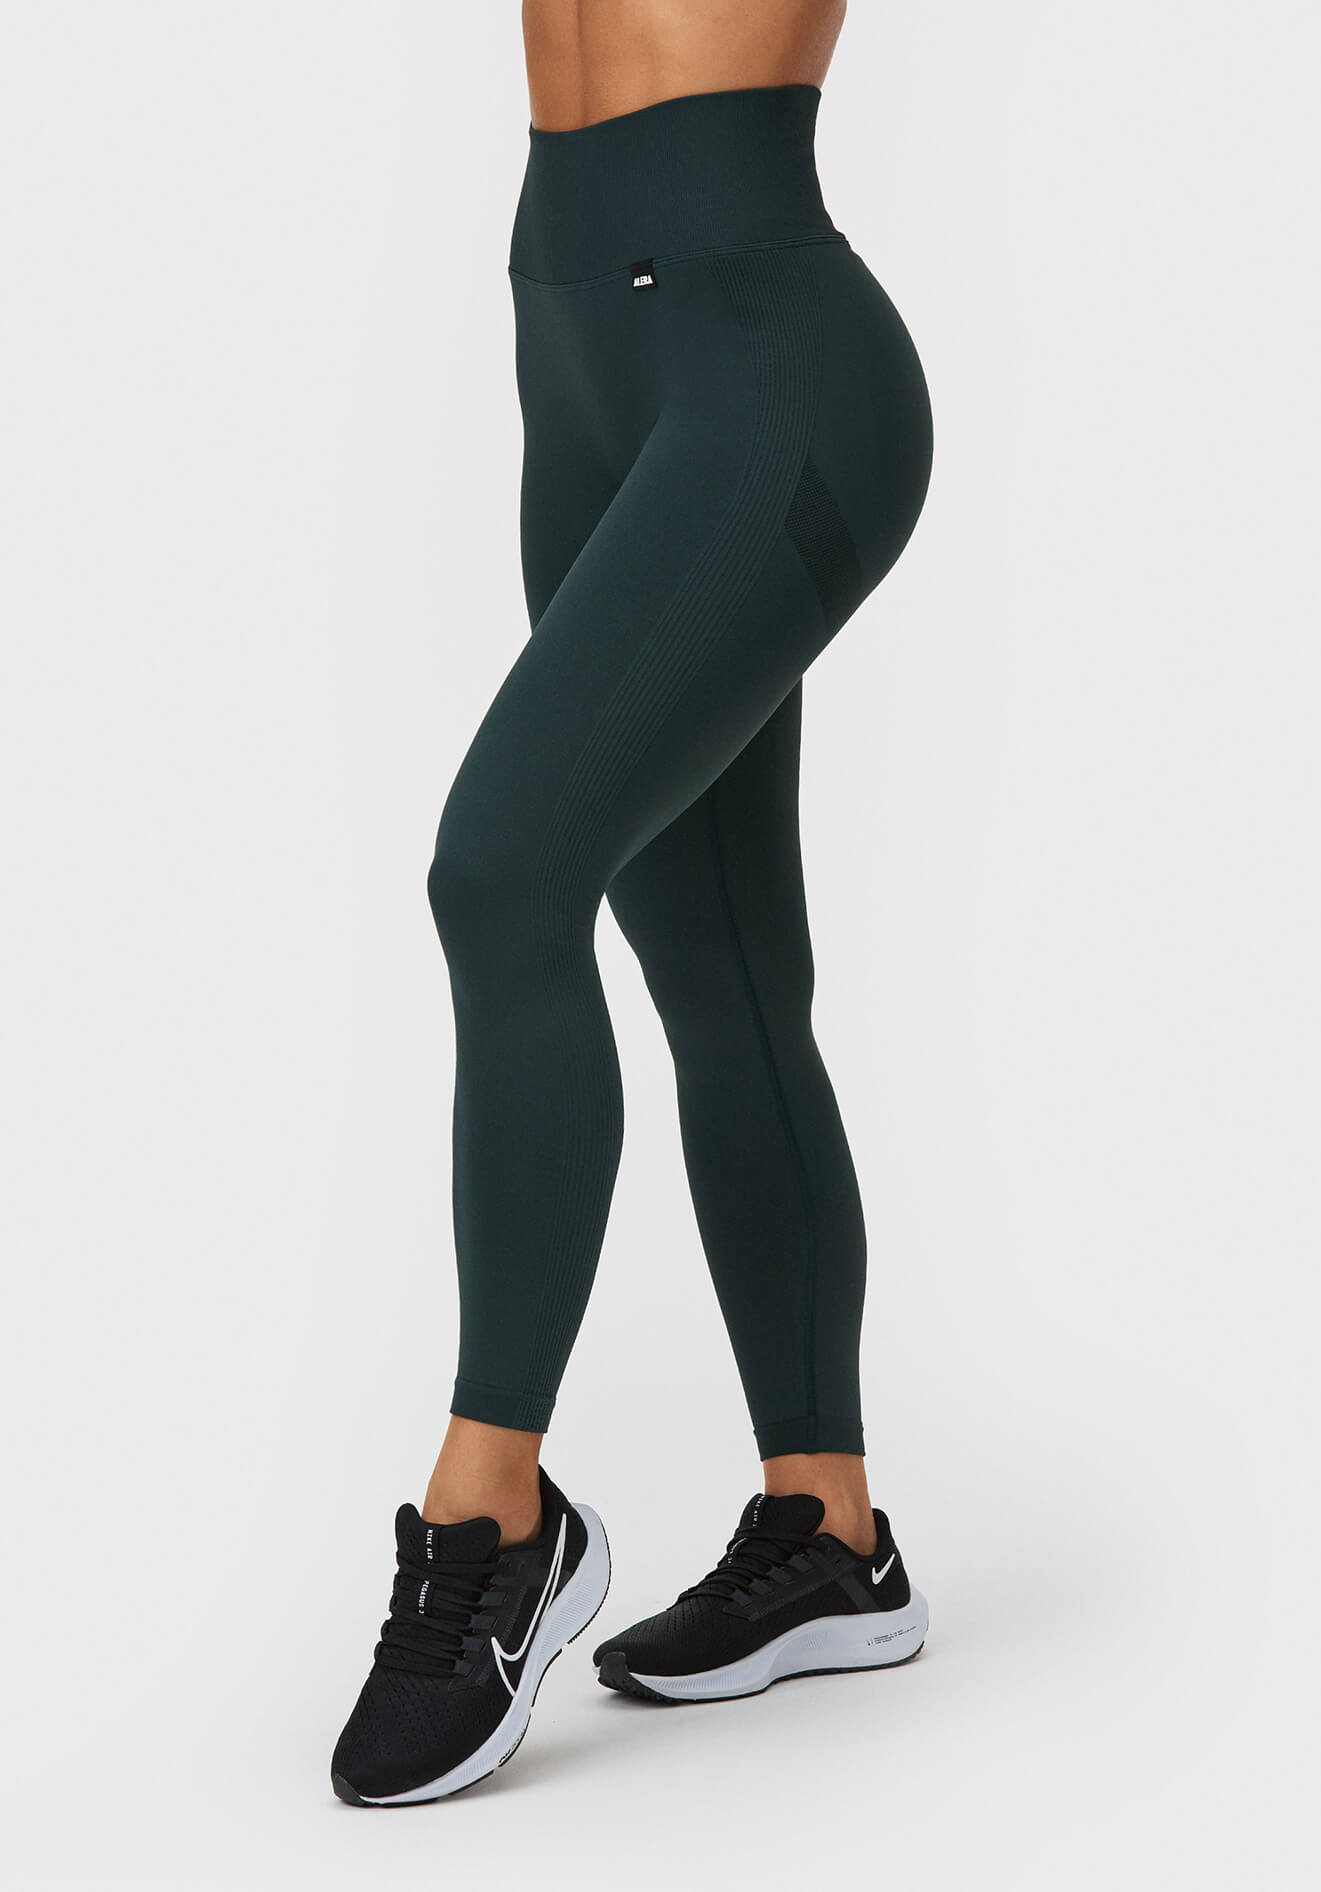 Alera - Shapeshifter Seamless Scrunch Tights - One More Rep